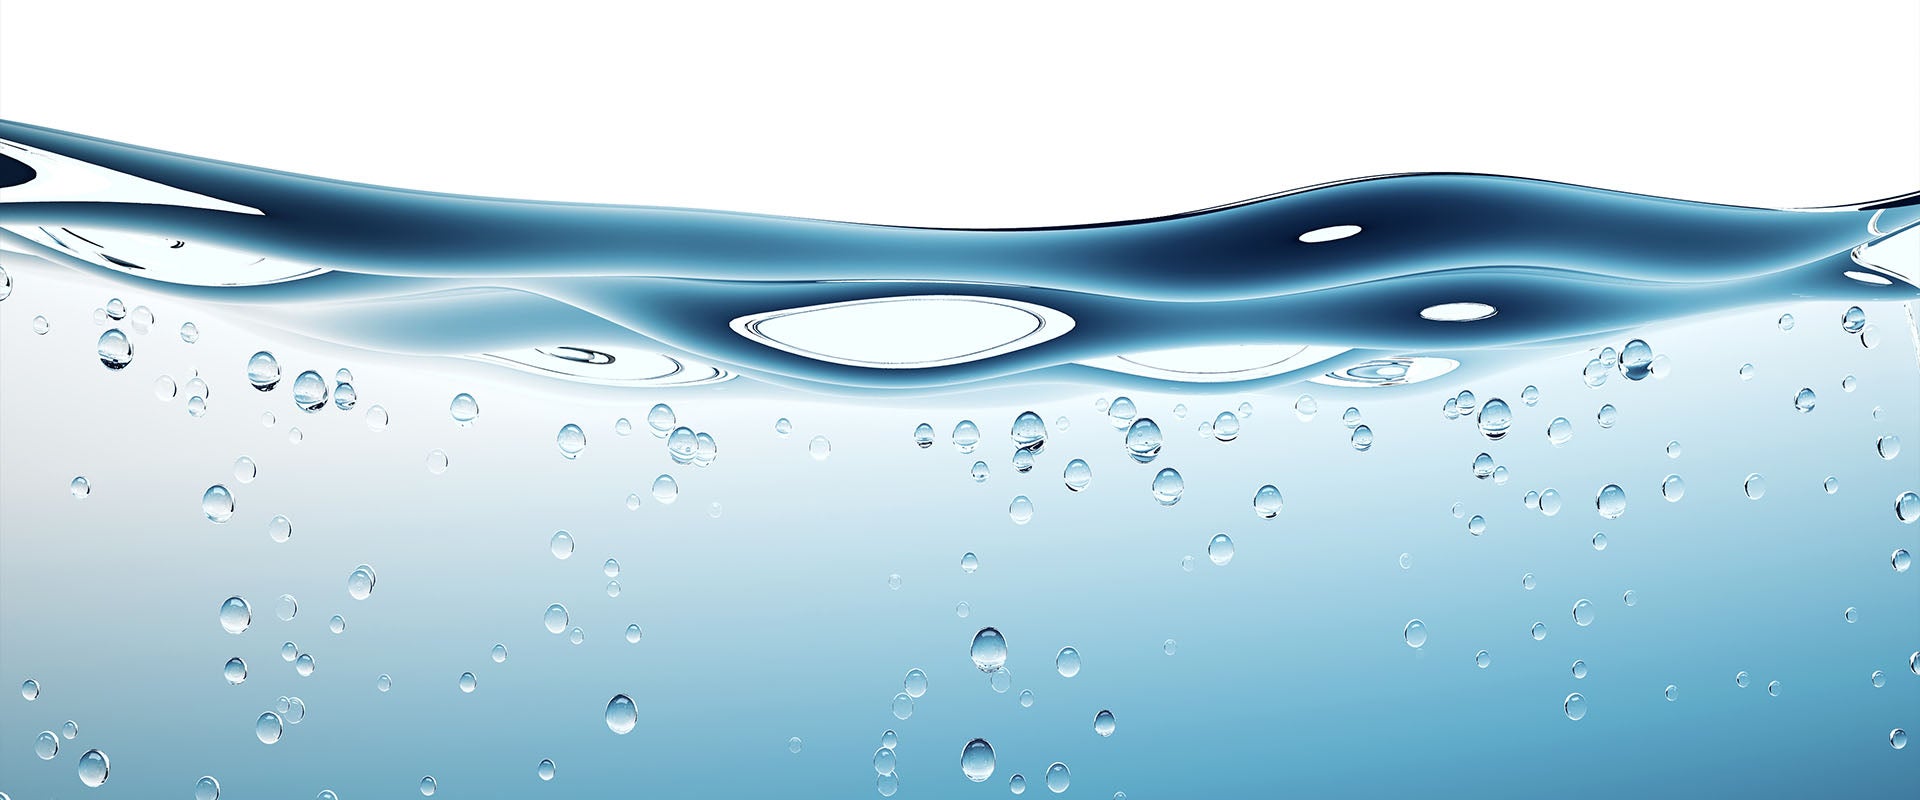 When Sustainability Drives Performance: The Case for Water